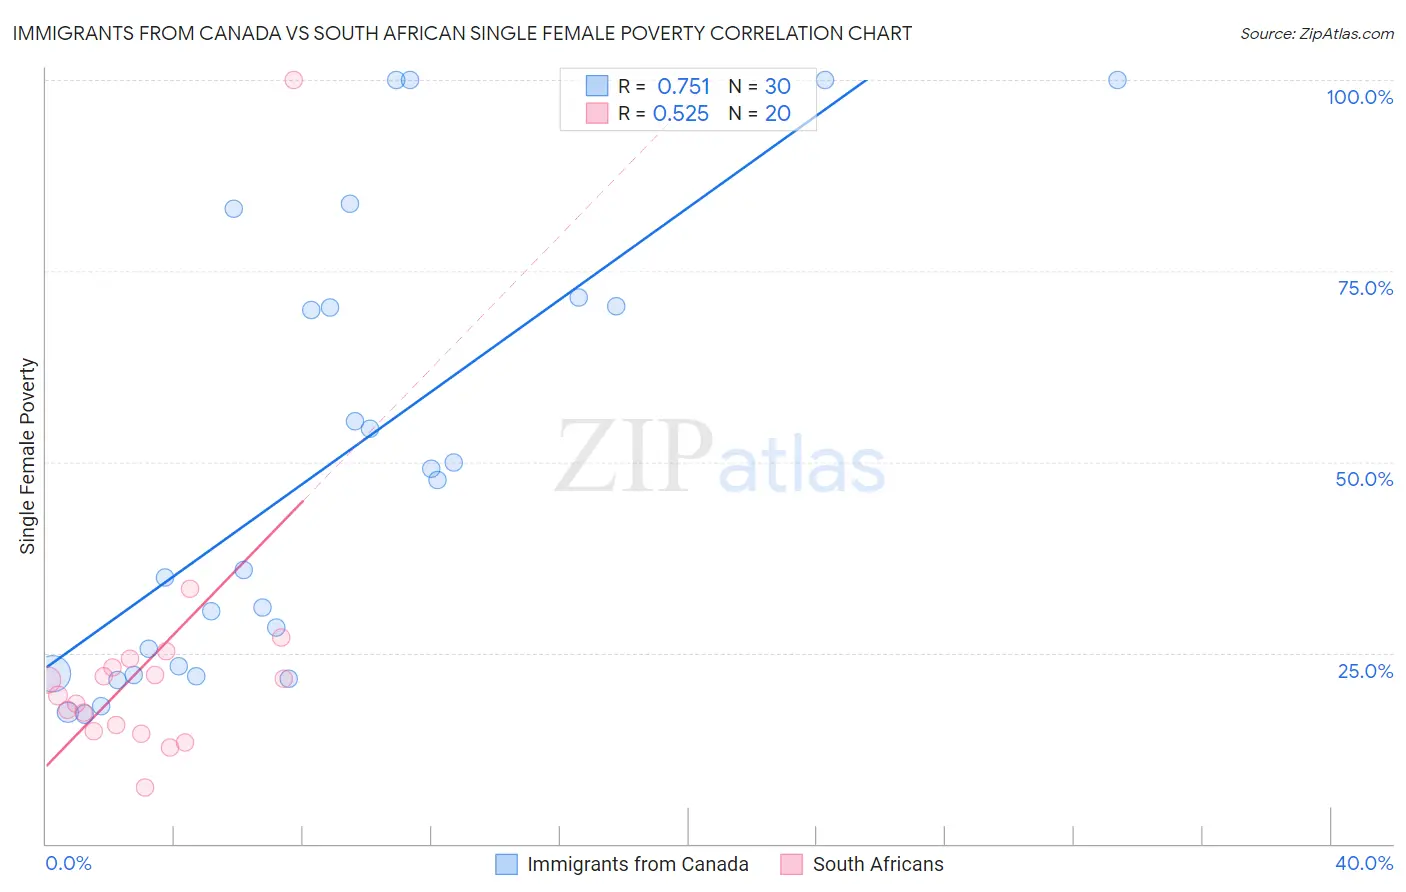 Immigrants from Canada vs South African Single Female Poverty